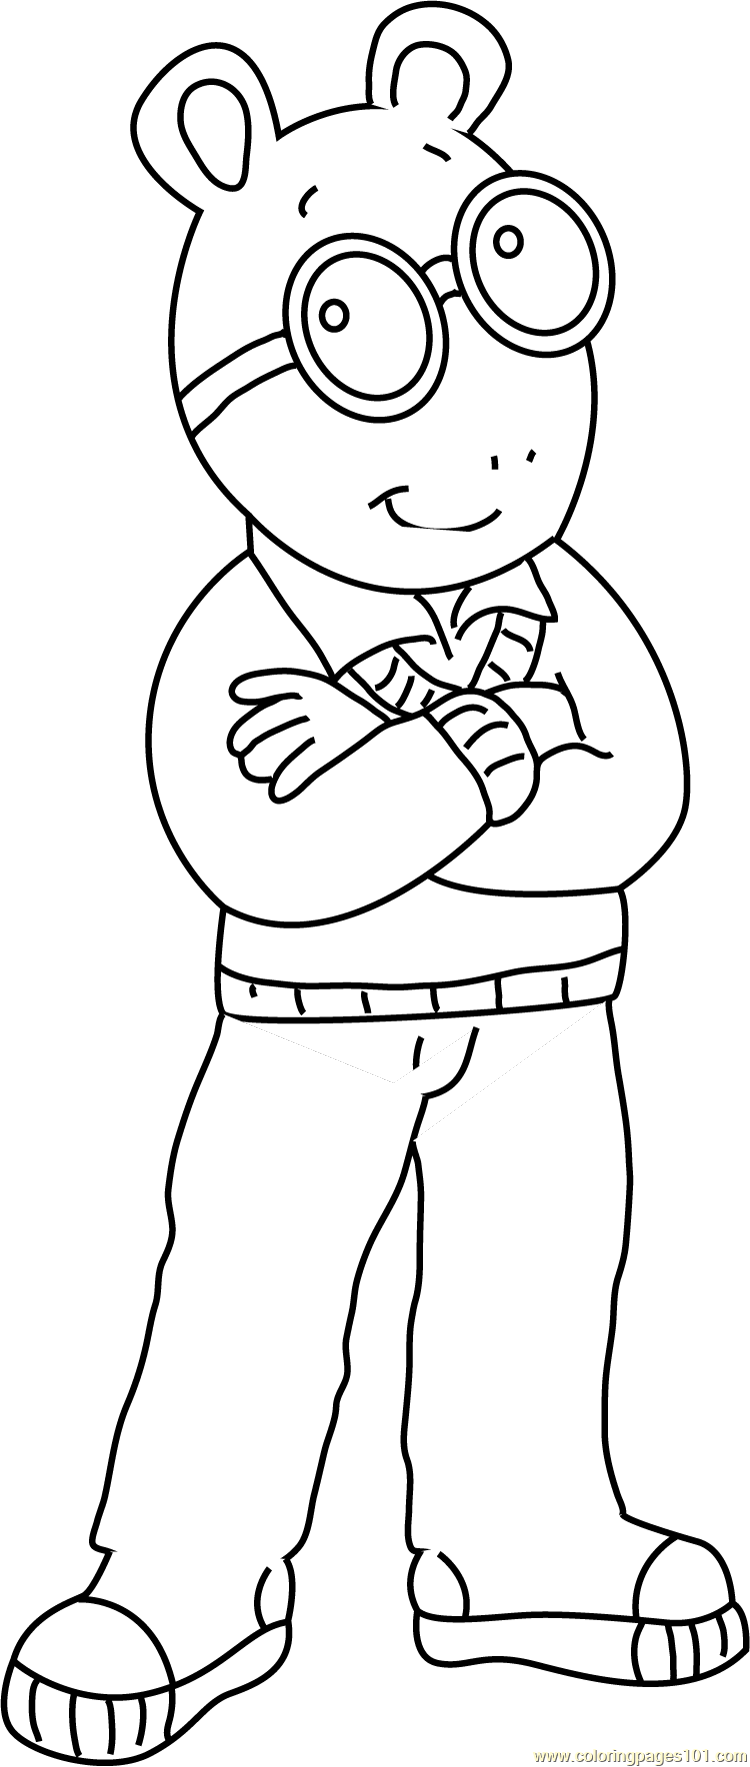 Arthur Looking Up Coloring Page for Kids - Free Arthur Printable